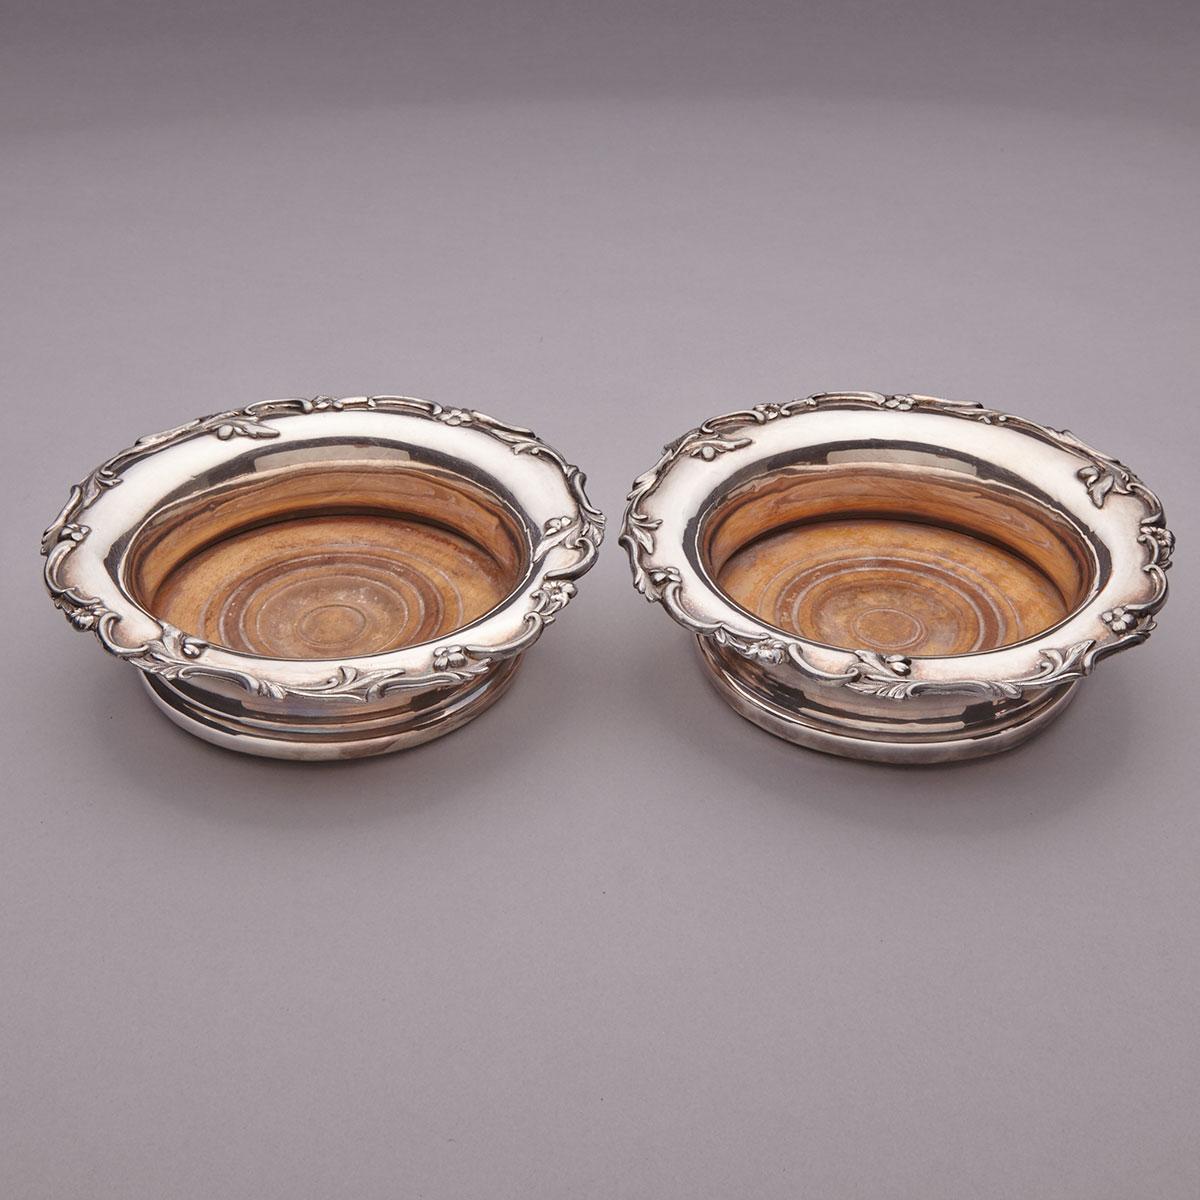 Pair of Victorian Plated Wine Coasters, mid-19th century